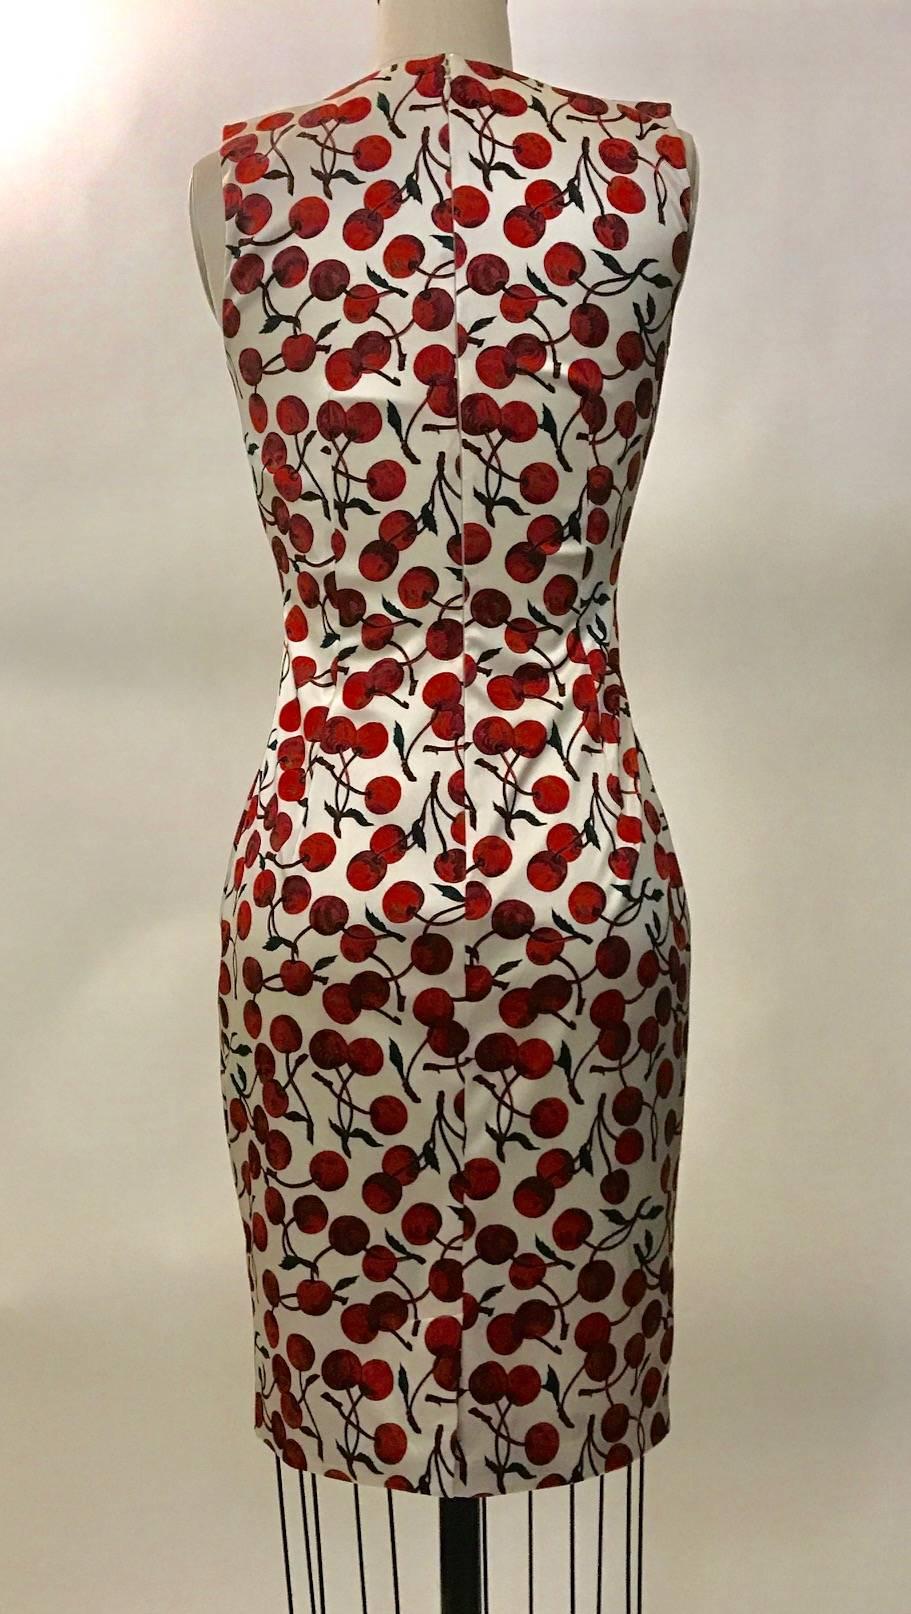 Dolce & Gabbana 1990s fitted cherry print dress in their iconic cherry print. Scoop neck at front, sleeveless. Back zip and hook and eye.

60% silk, 32% nylon, 8% elastane.
Fully lined in 64% viscose, 32% nylon, 4% elastane.

Made in Italy.

Size IT